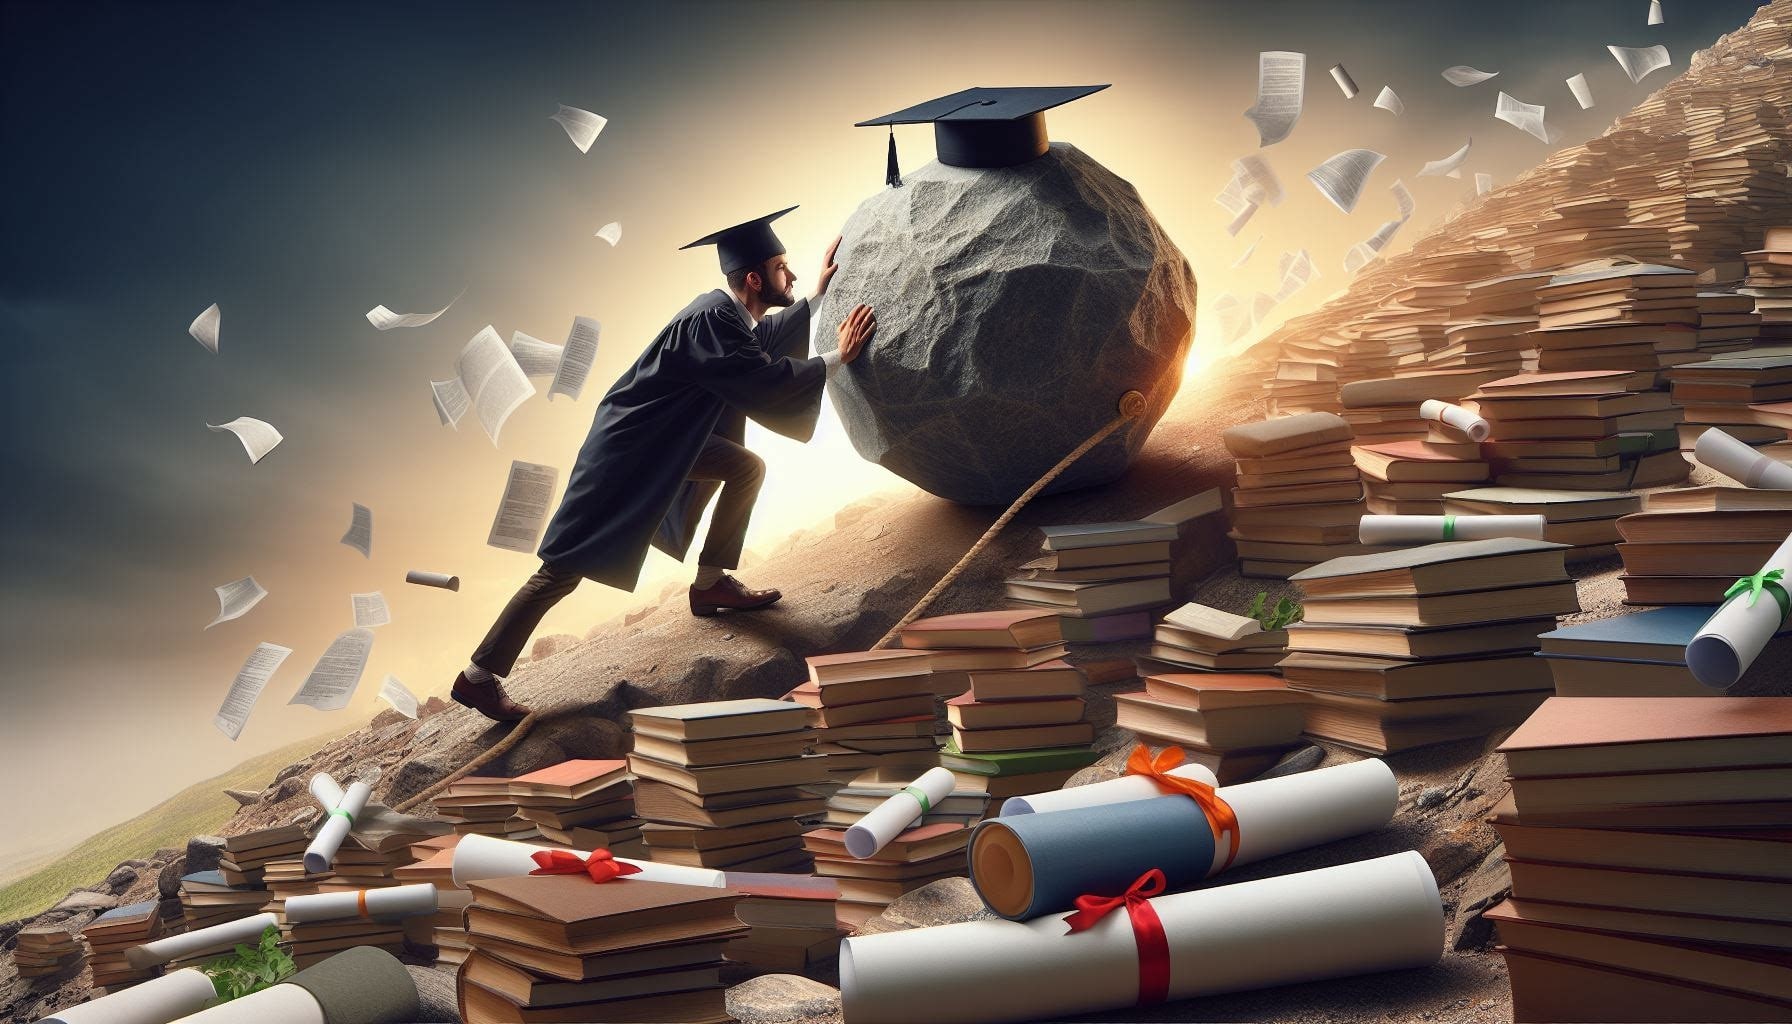 Transforming Failures into Strengths in Your PhD Application: An image of a PhD scholar with a graduation hat rolling a large stone uphill, surrounded by books and research papers, looking motivated and resilient, not giving up